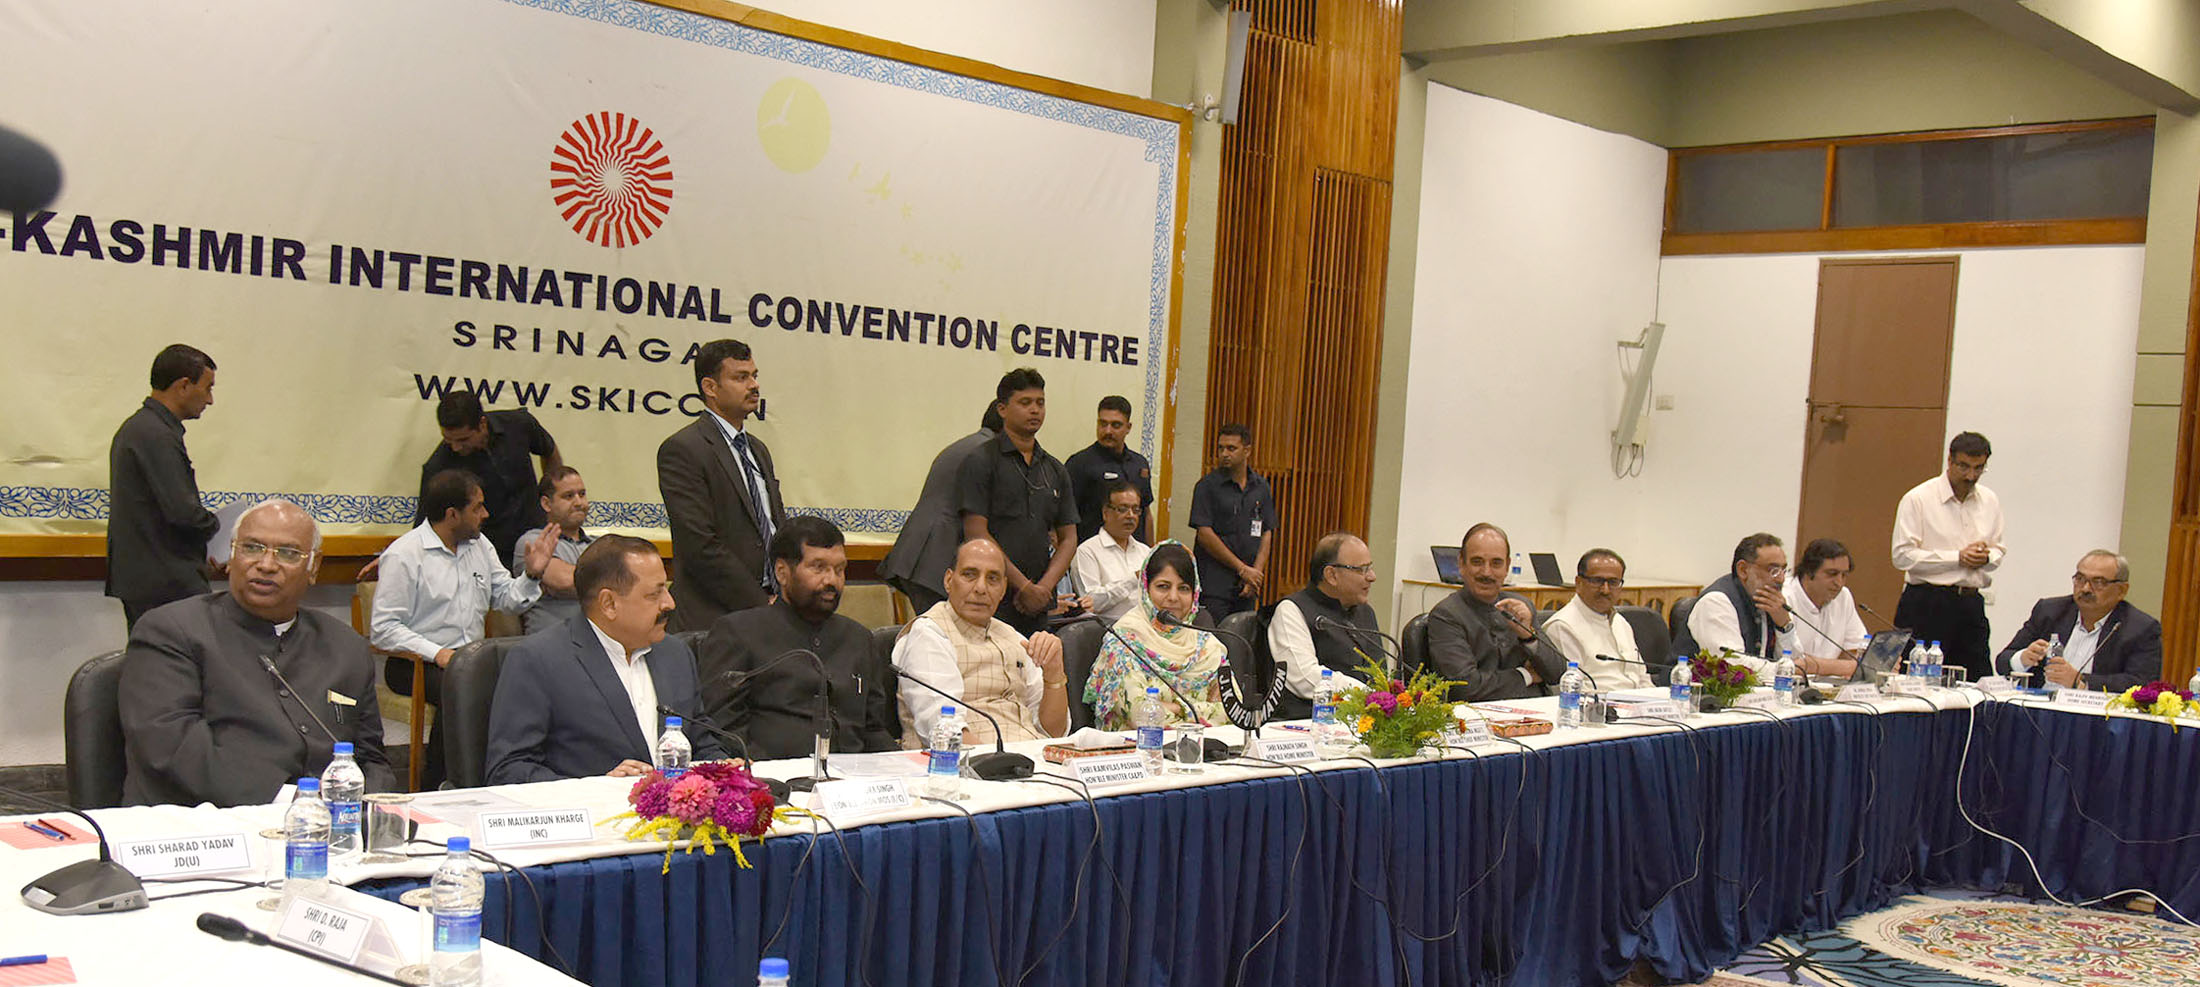 The Union Home Minister, Shri Rajnath Singh chairing the meeting of All Party delegation with the Jammu and Kashmir Government, in Srinagar, Jammu and Kashmir on September 04, 2016.  The Union Minister for Finance and Corporate Affairs, Shri Arun Jaitley, the Chief Minister of Jammu and Kashmir, Ms. Mehbooba Mufti and other dignitaries are also seen.